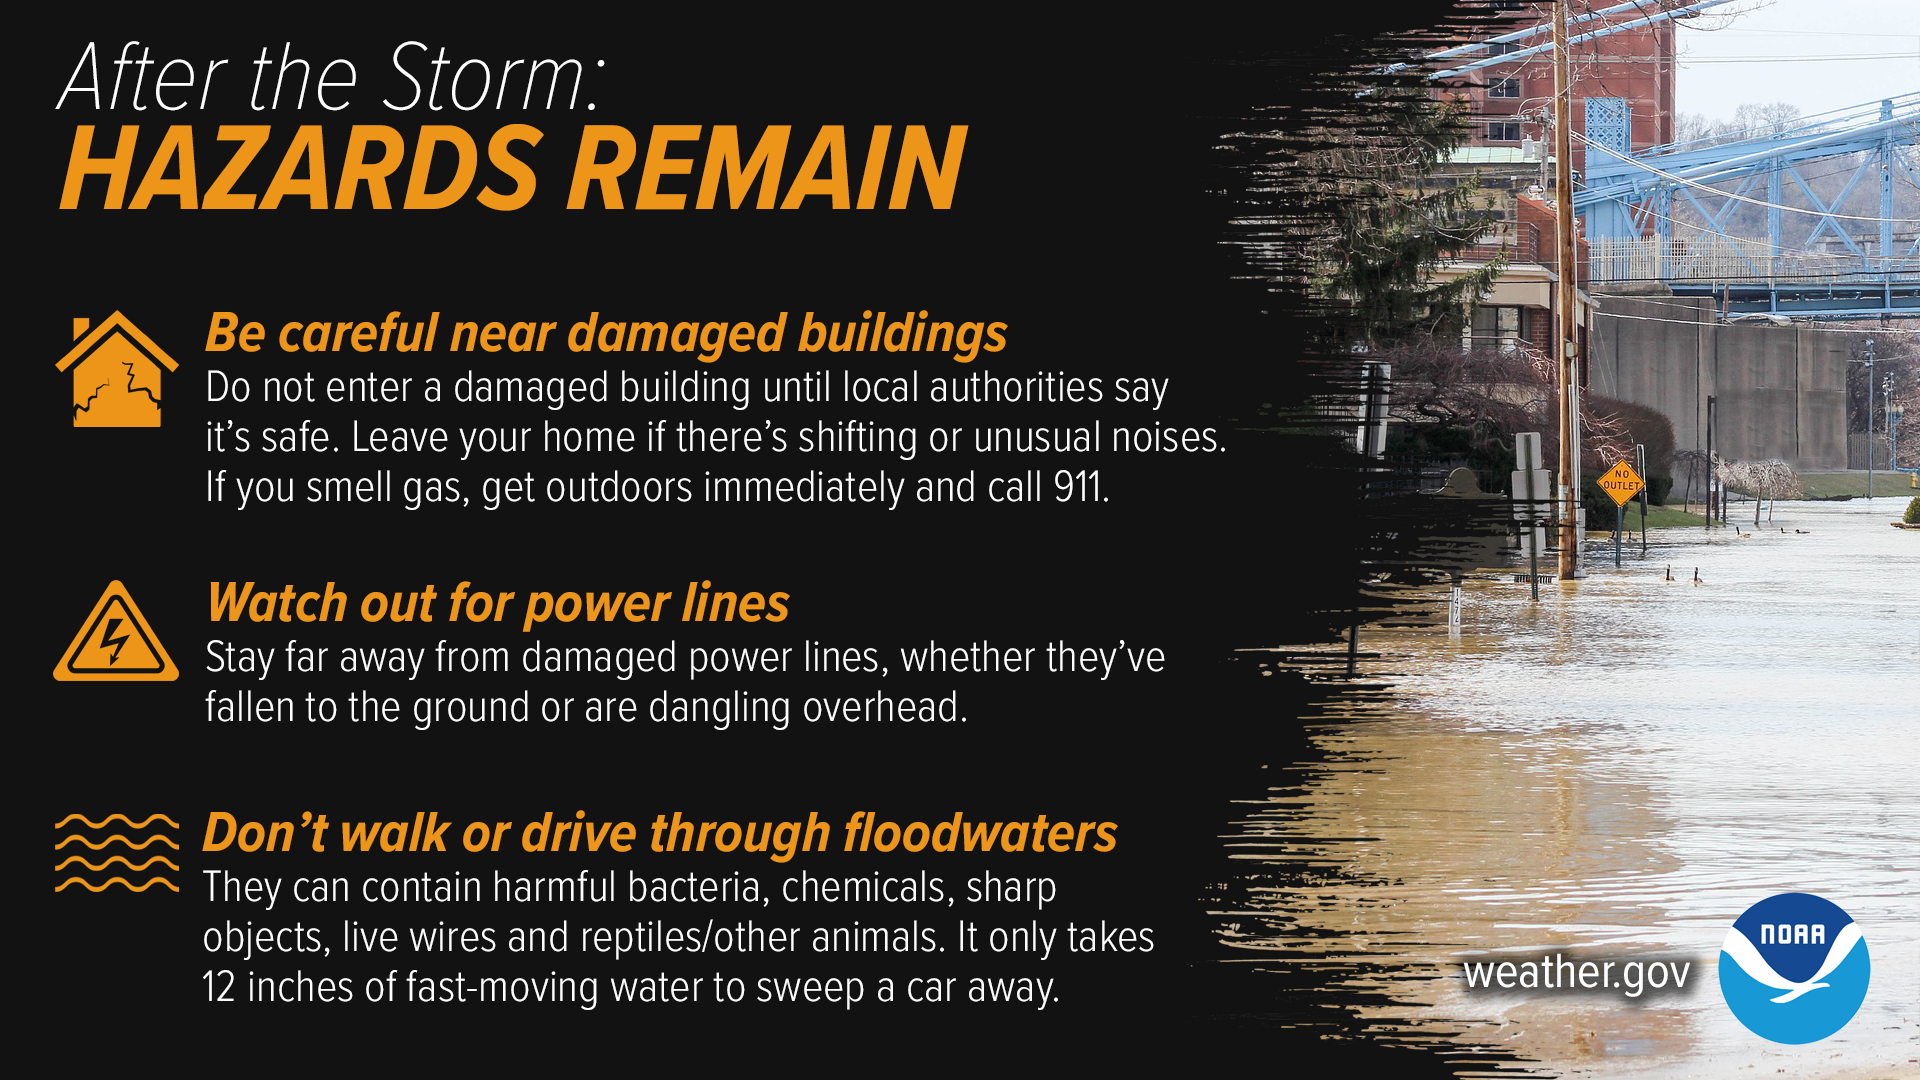 After The Storm: Hazards Remain. 1) Be careful near damaged buildings. Do not enter a damaged building until local authorities say it's safe. Leave your home if there's shifting or unusual noises. If you smell gas, get outdoors immediately and call 911. 2) Watch out for power lines. Stay far away from damaged power lines, whether they've fallen to the ground or are dangling overheard. 3) Don't walk or drive through floodwaters. They can contain harmful bacteria, chemicals, sharp objects, live wires and reptiles/other animals. It only takes 12 inches of fast-moving water to sweep a car away.